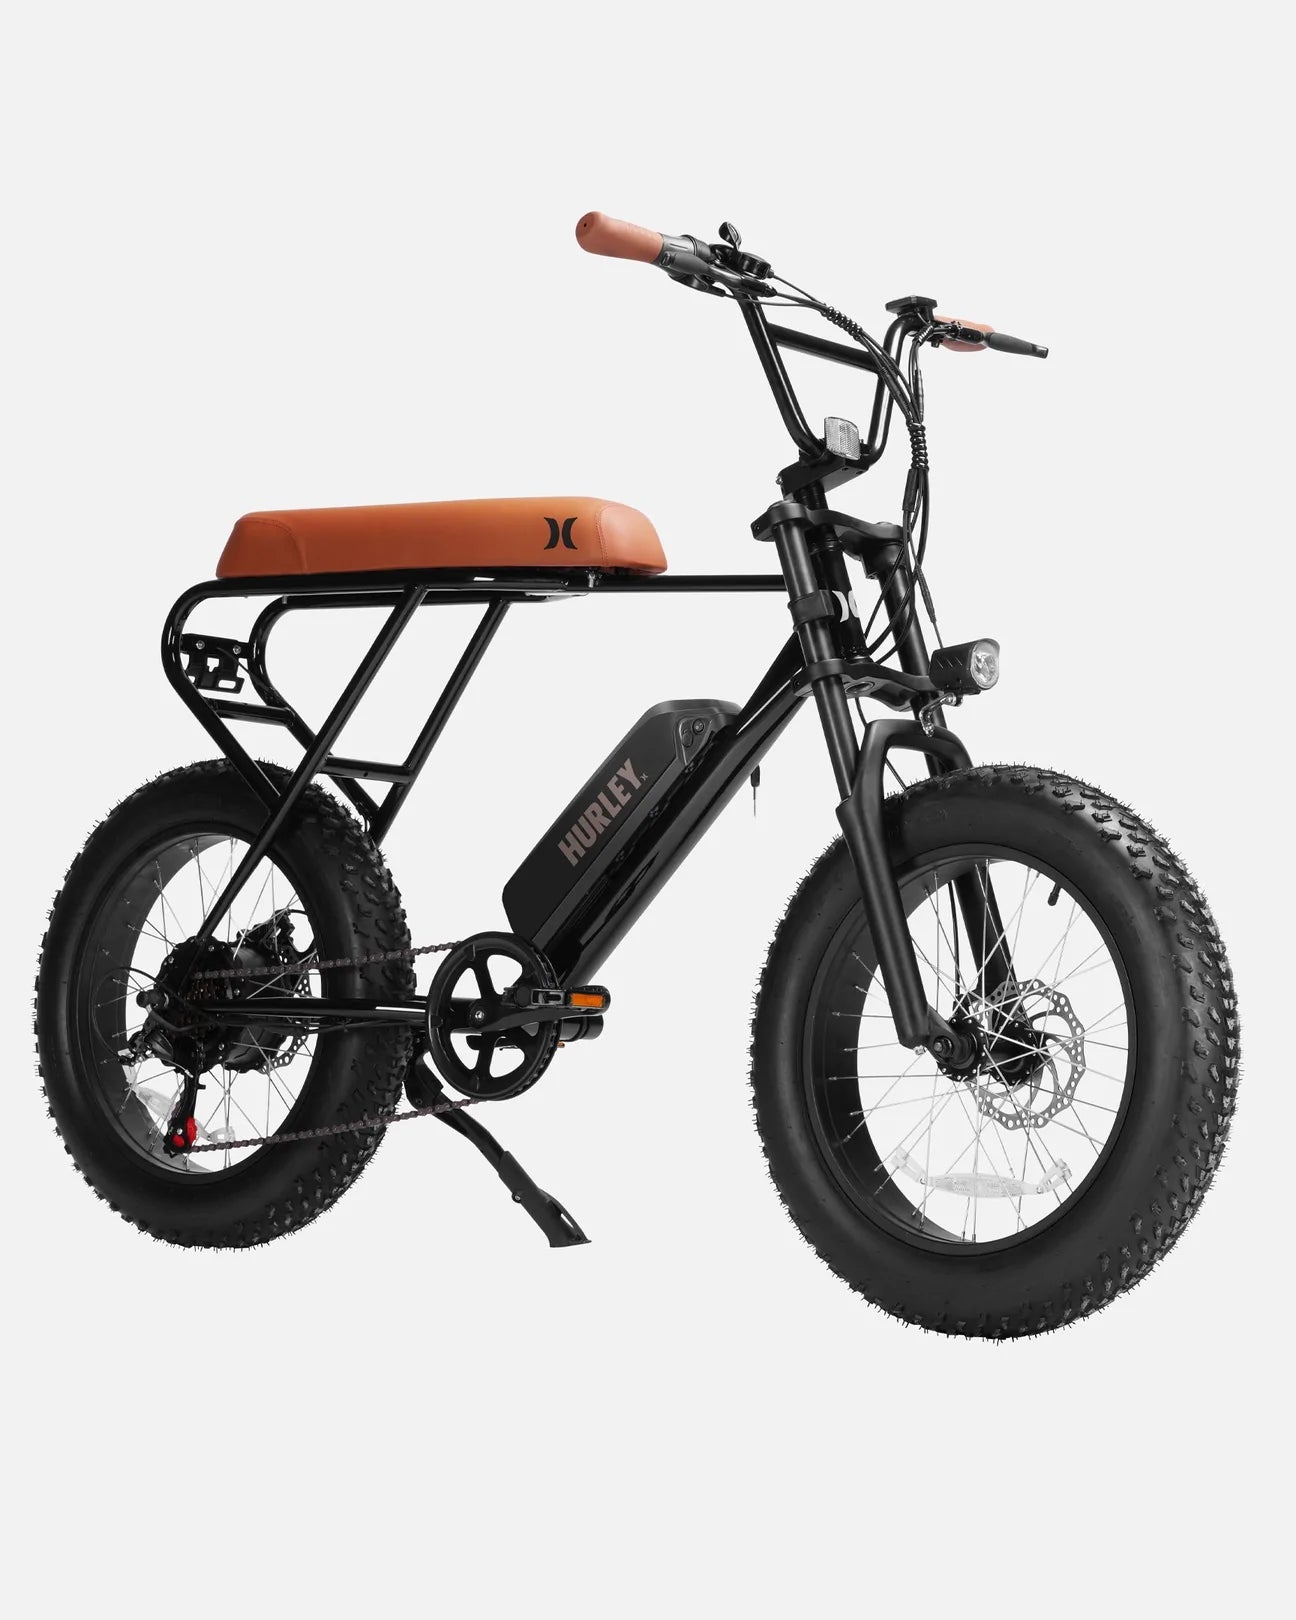 THE FEATURES AND SPEED OF E-BIKES-Street Rides